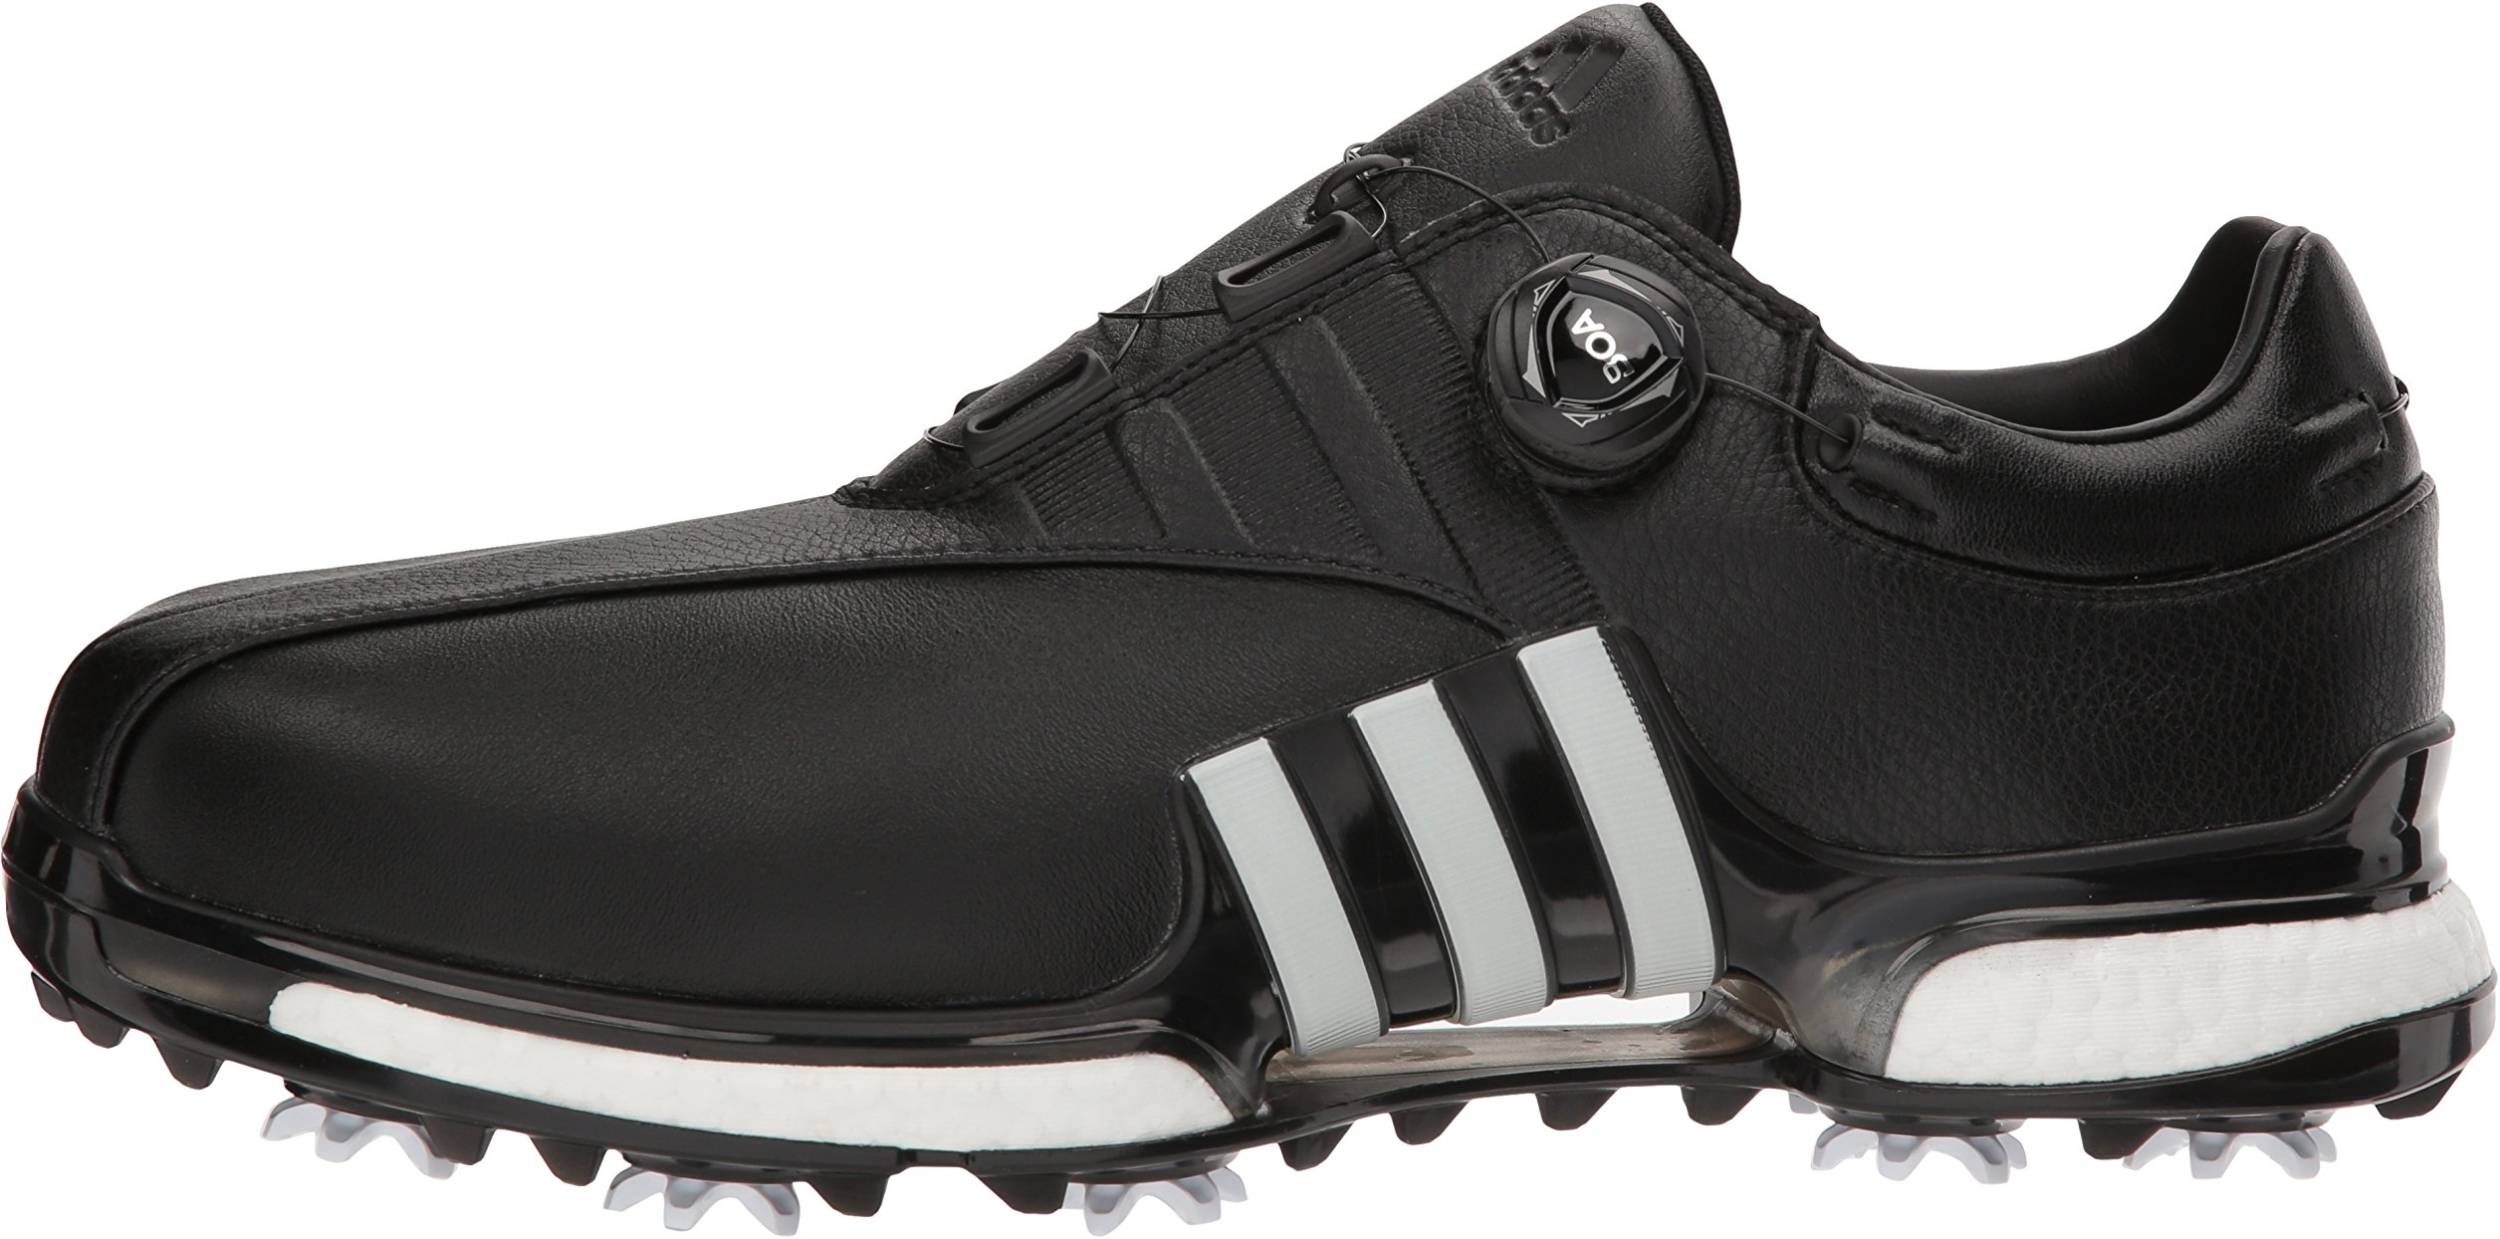 Only $159 + Review of Adidas Tour360 EQT BOA | RunRepeat